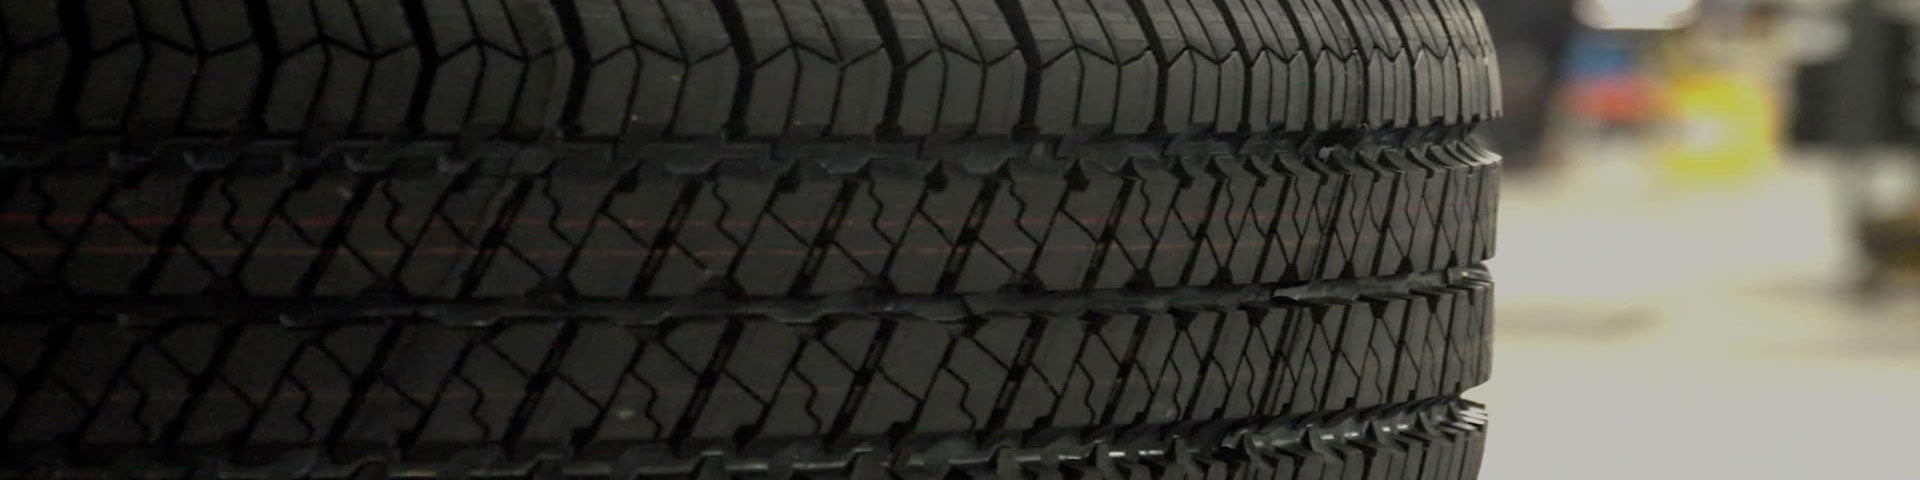 Close up view of a tire on its side